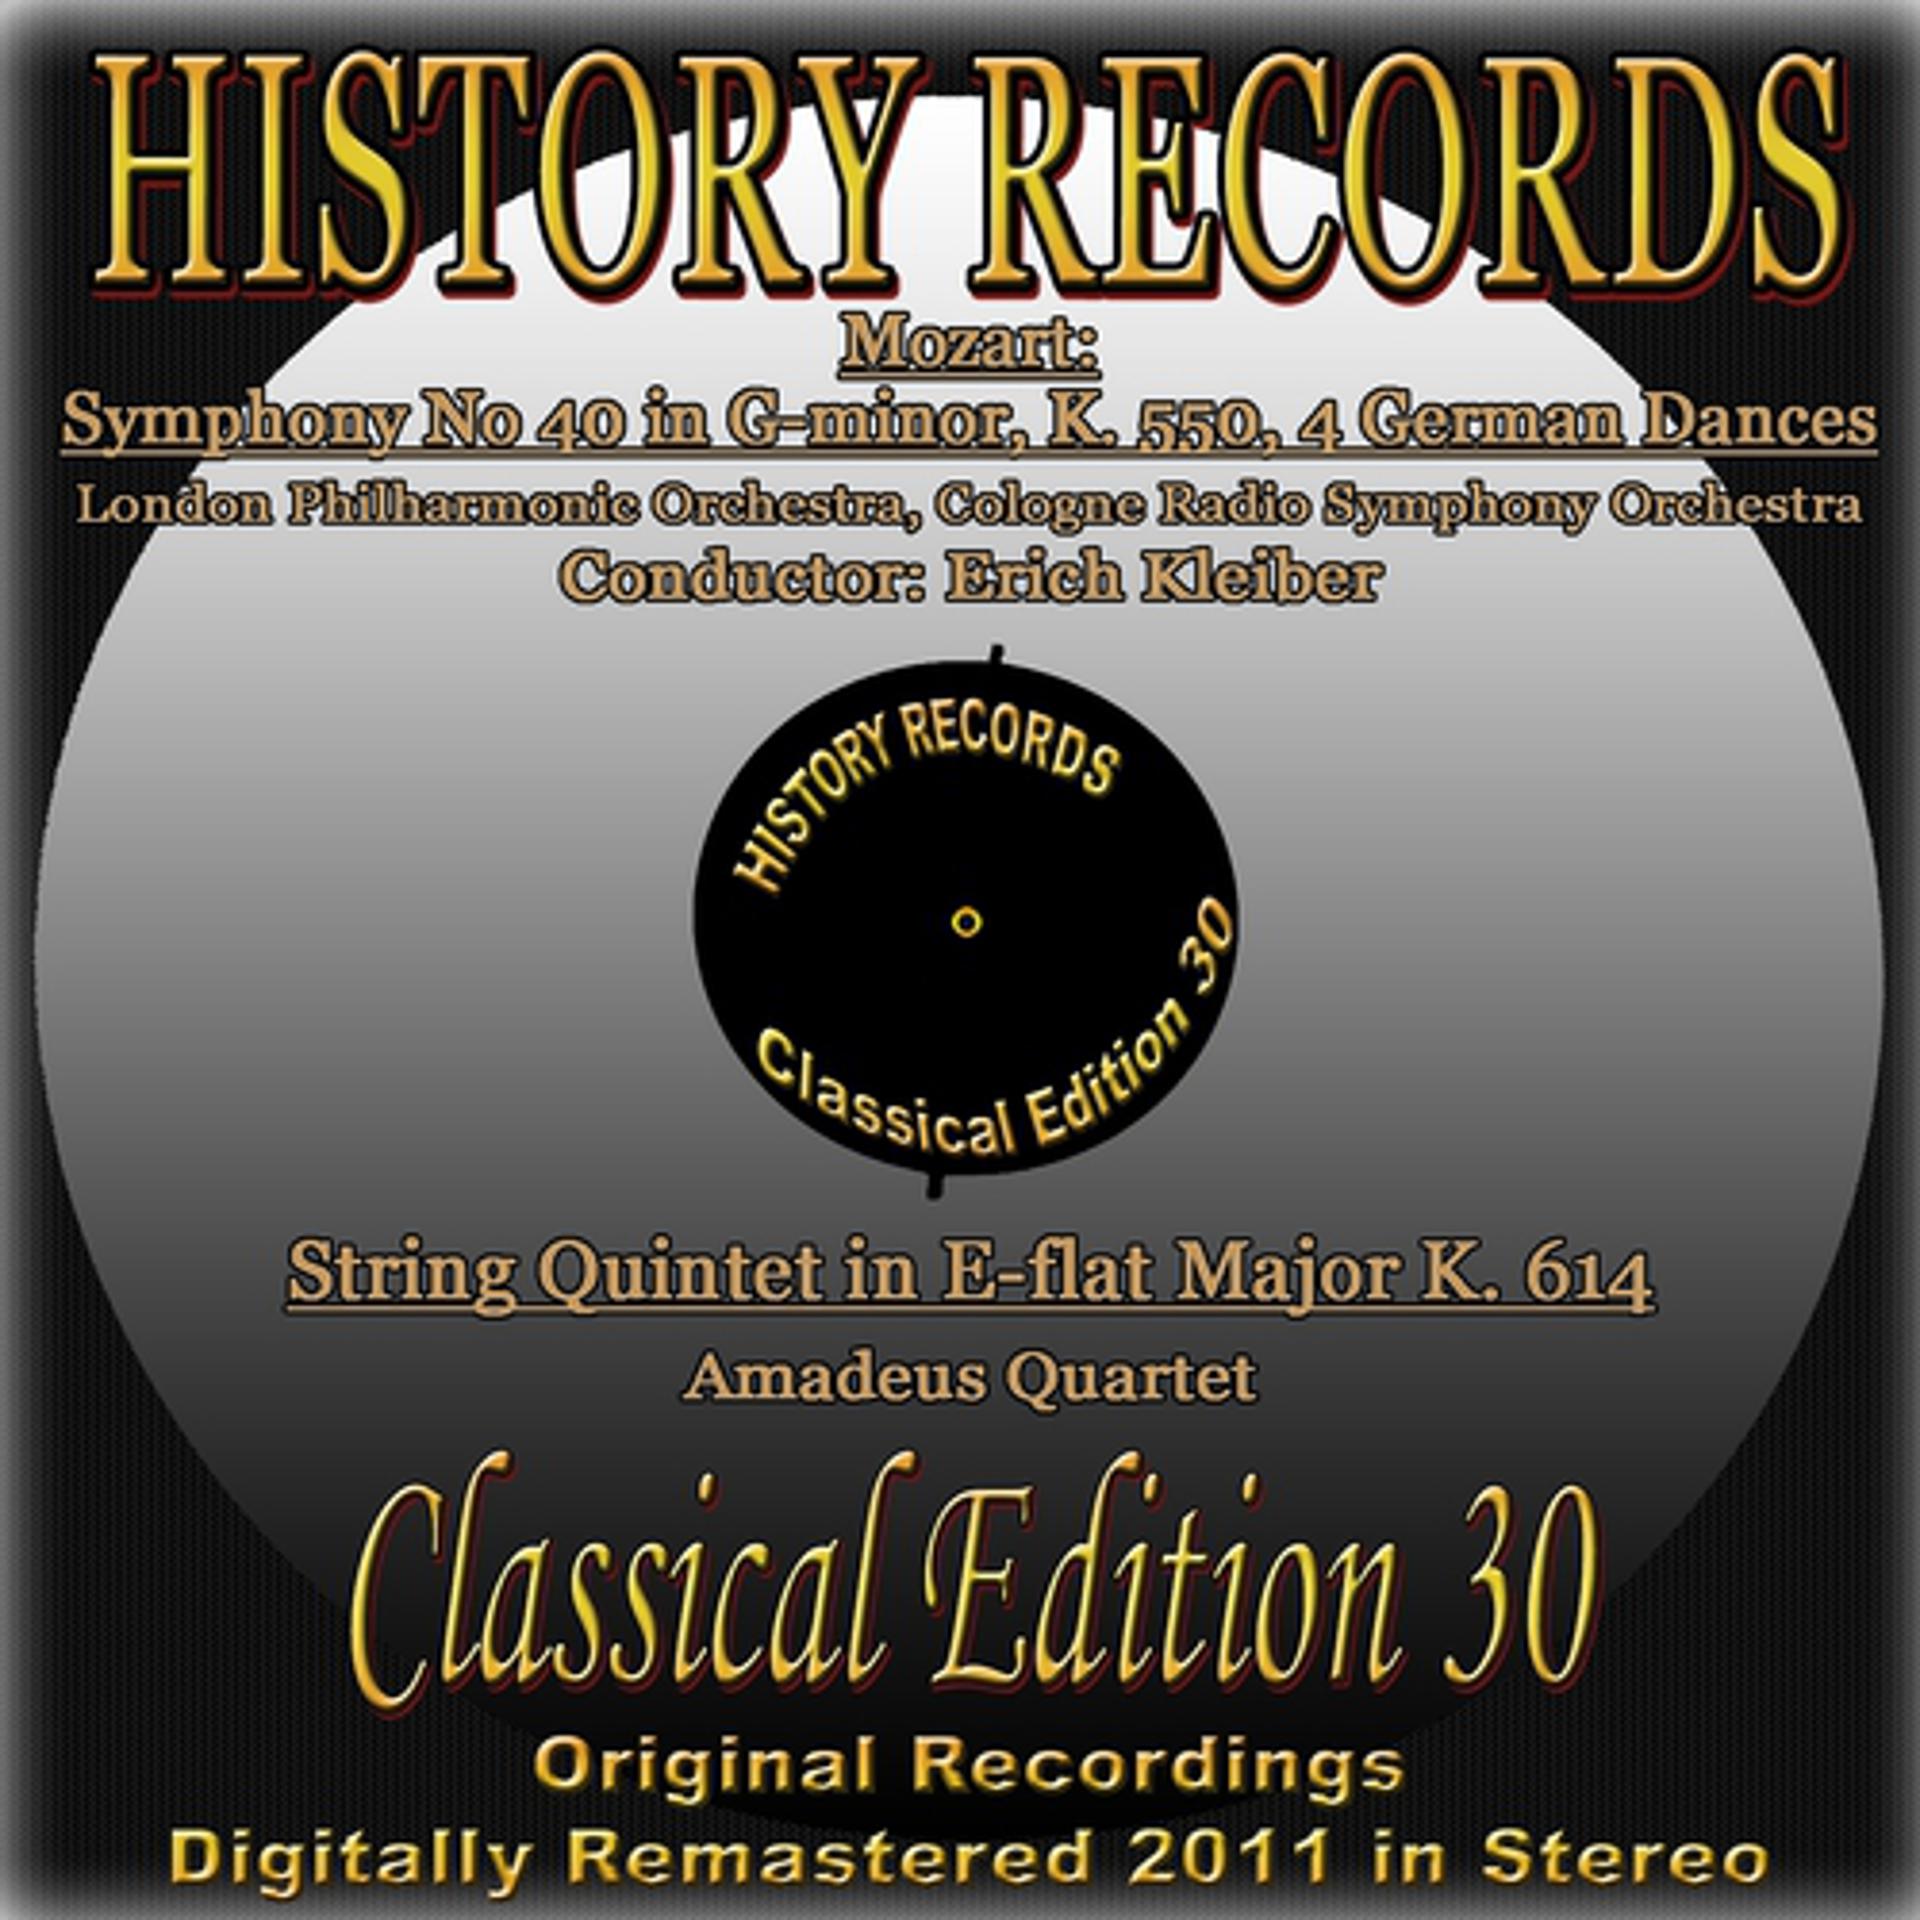 Постер альбома Mozart: Symphony No. 40 in G Minor, K. 550, String Quintet in E-flat Major, K. 614 & 4 German Dances (History Records - Classical Edition 30 - Original Recordings Digitally Remastered 2011 in Stereo)